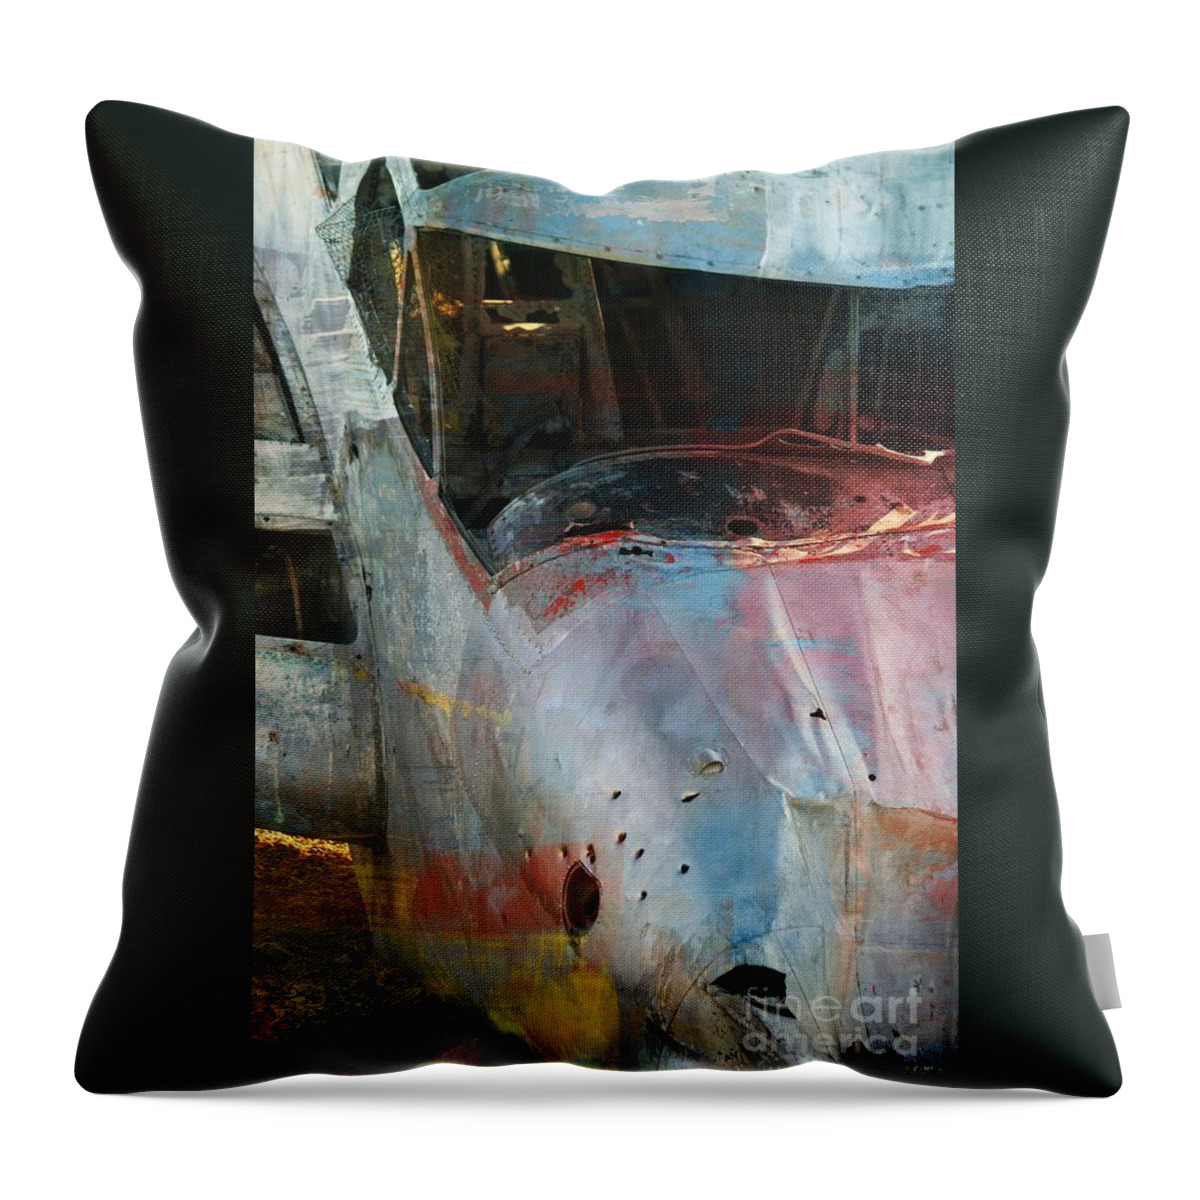 Airplane Throw Pillow featuring the photograph Plane Wreck Norway Illinois by Veronica Batterson